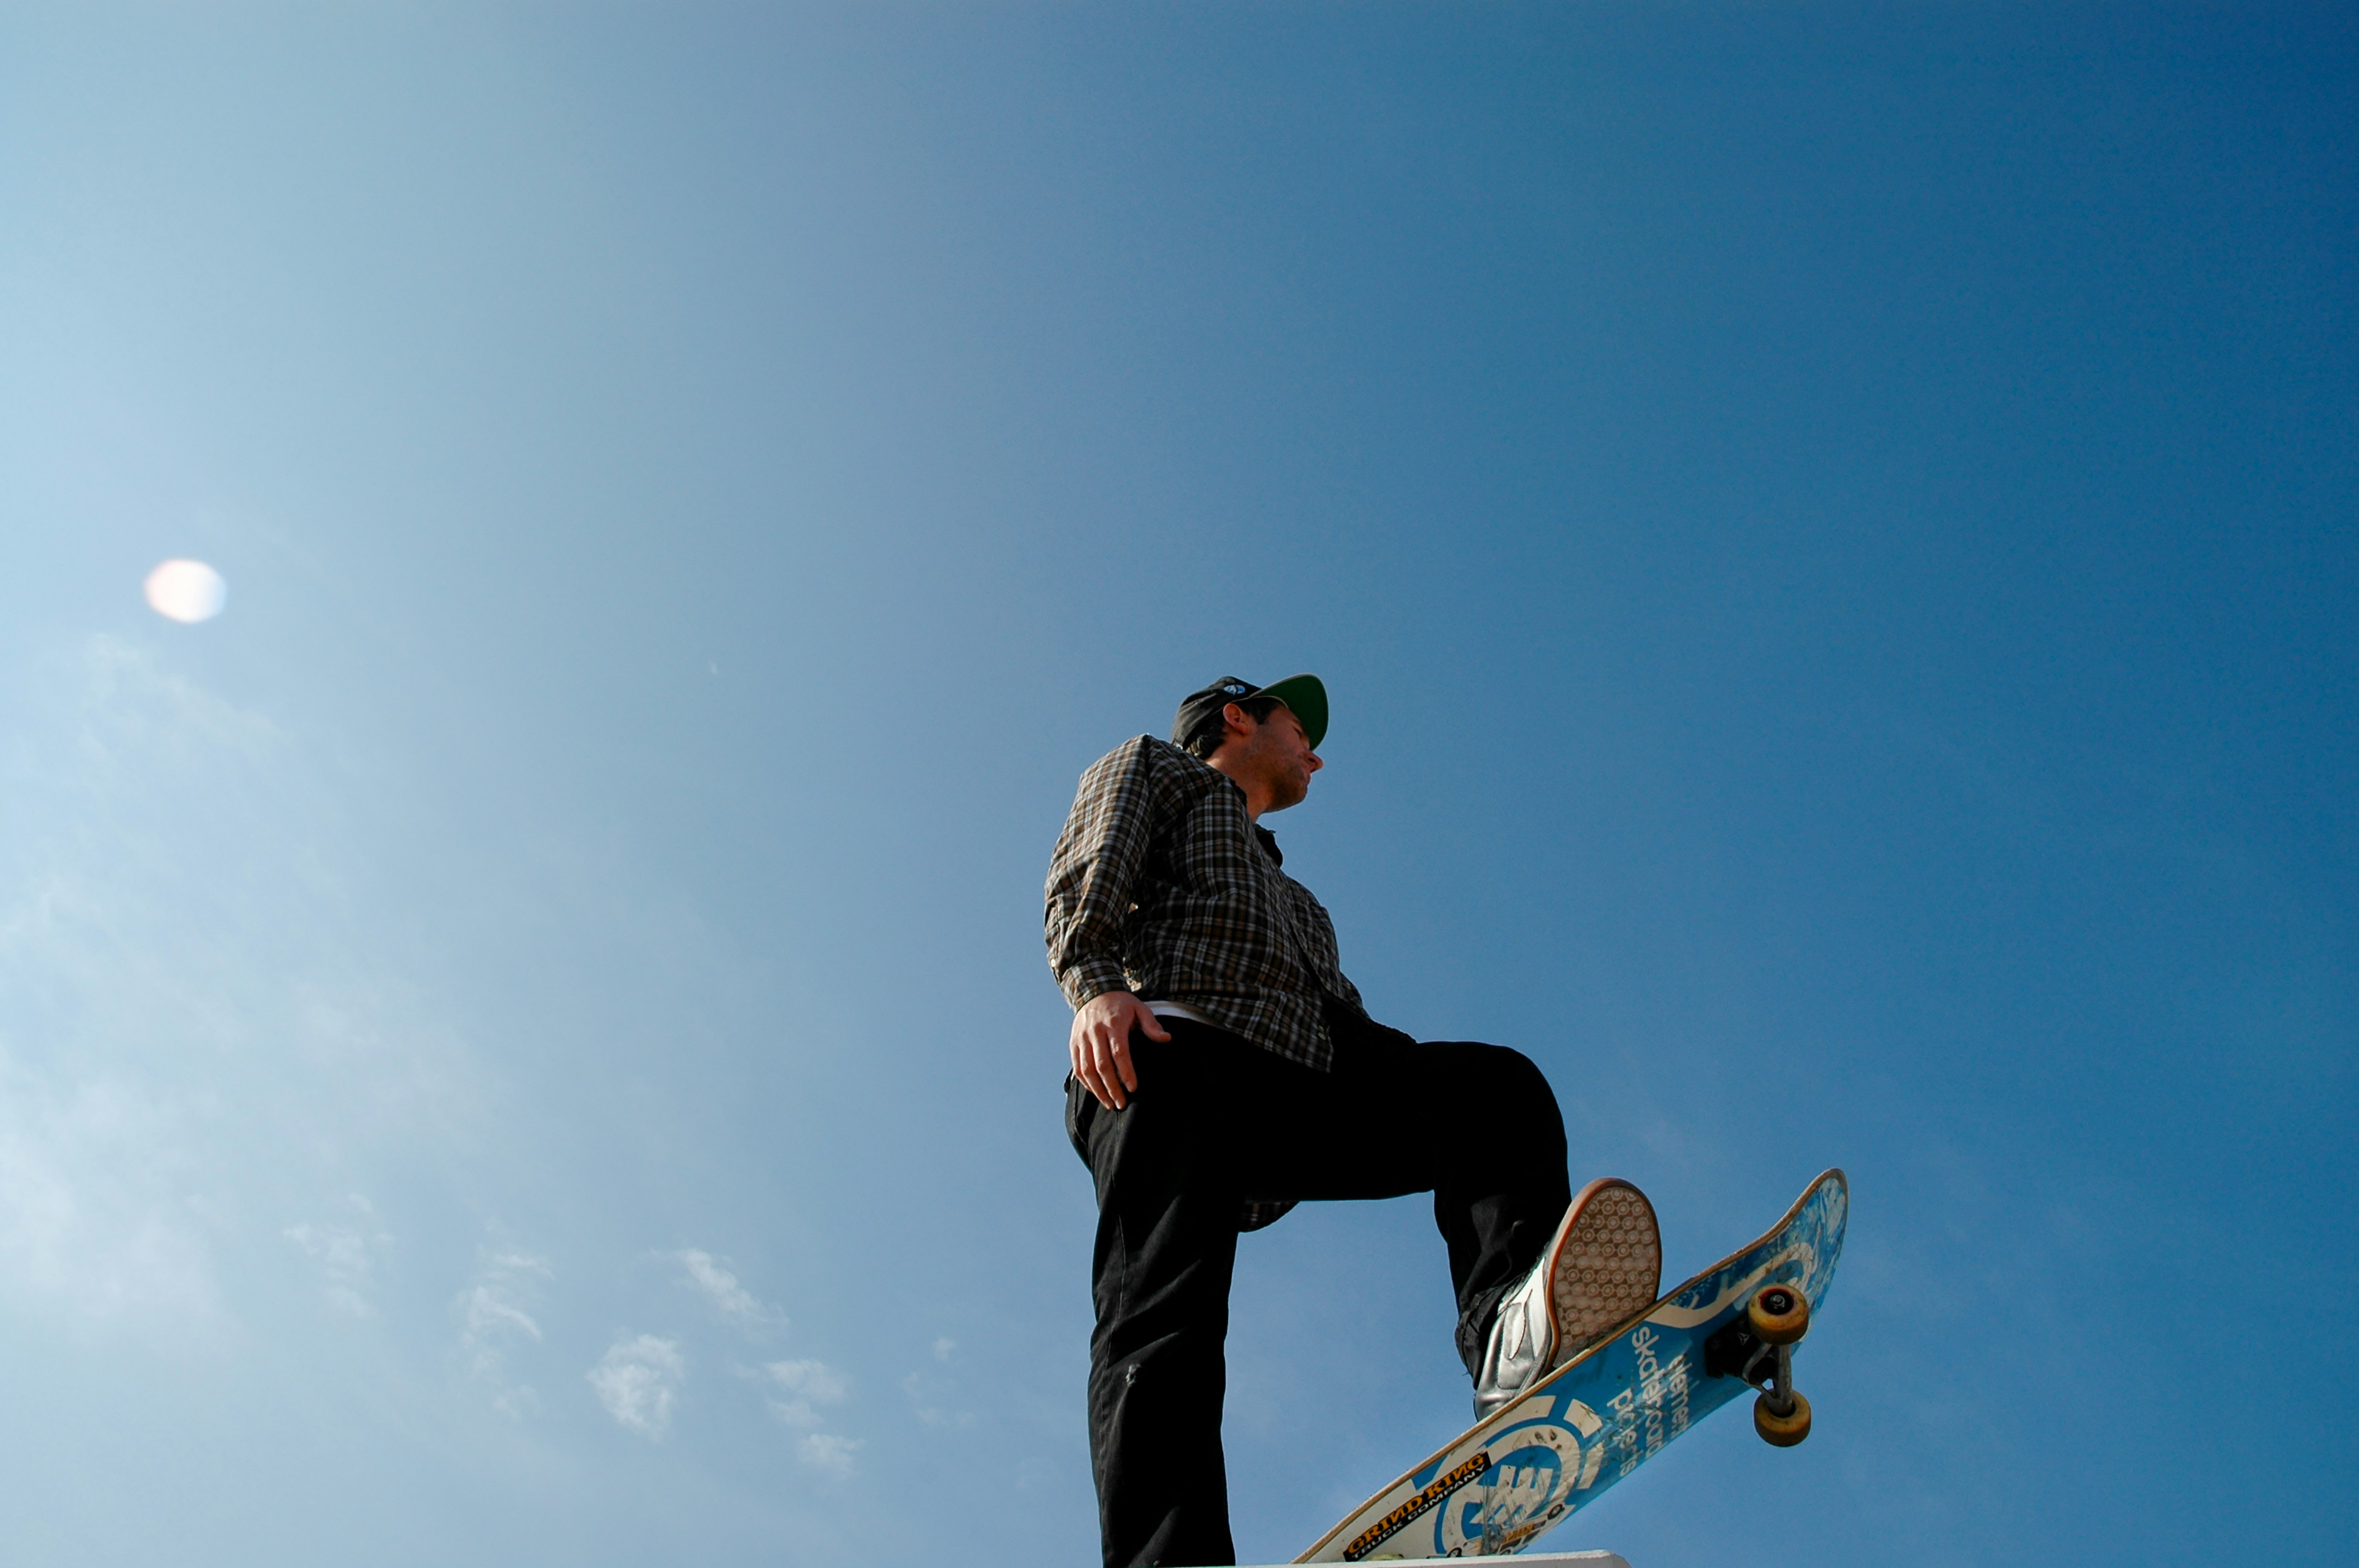 man in black and white checkered dress shirt and black pants standing on skateboard during daytime